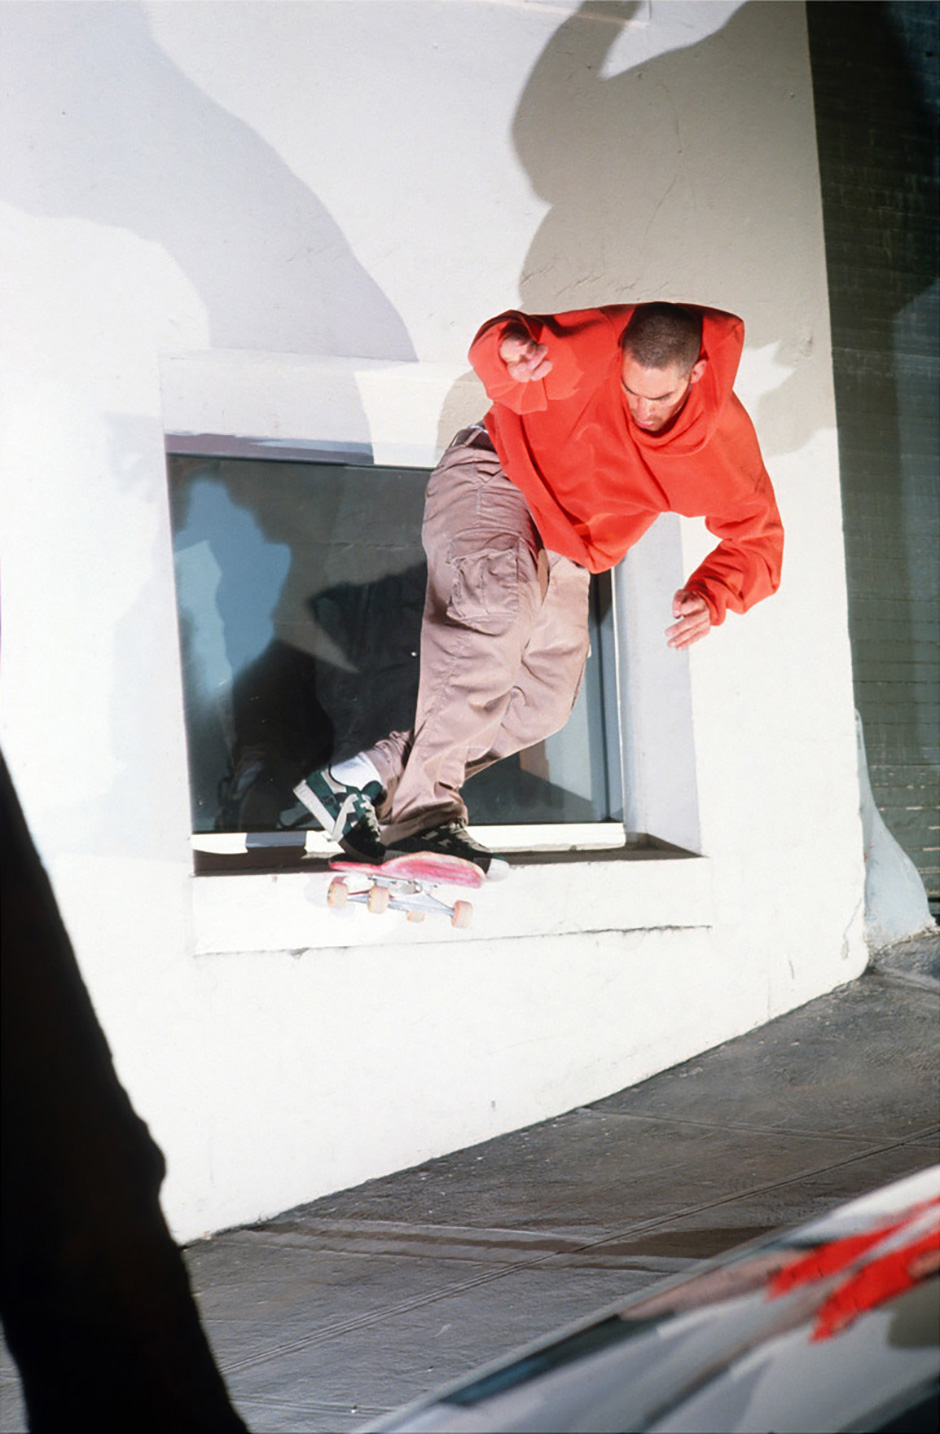 Sean Young backside tailslides a window ledge for Tobin Yelland's lens in 1998. This was Ted Barrow's photo pick for his 'Visuals' interview